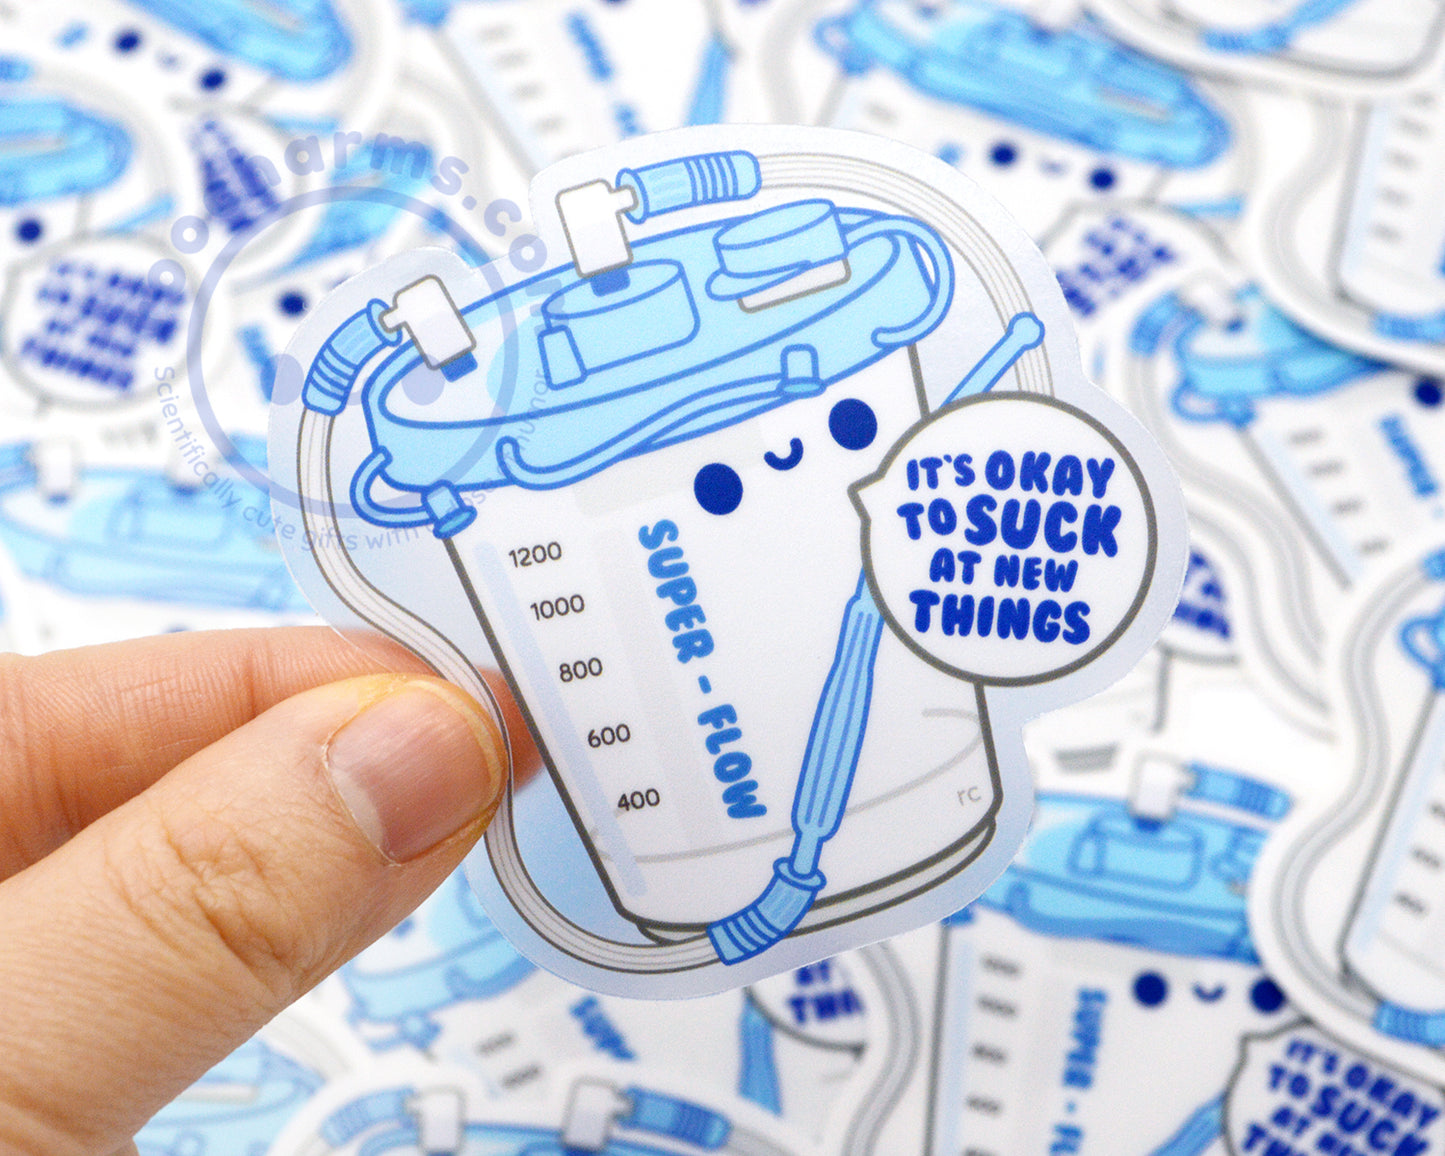 Suction Canister Vinyl Sticker